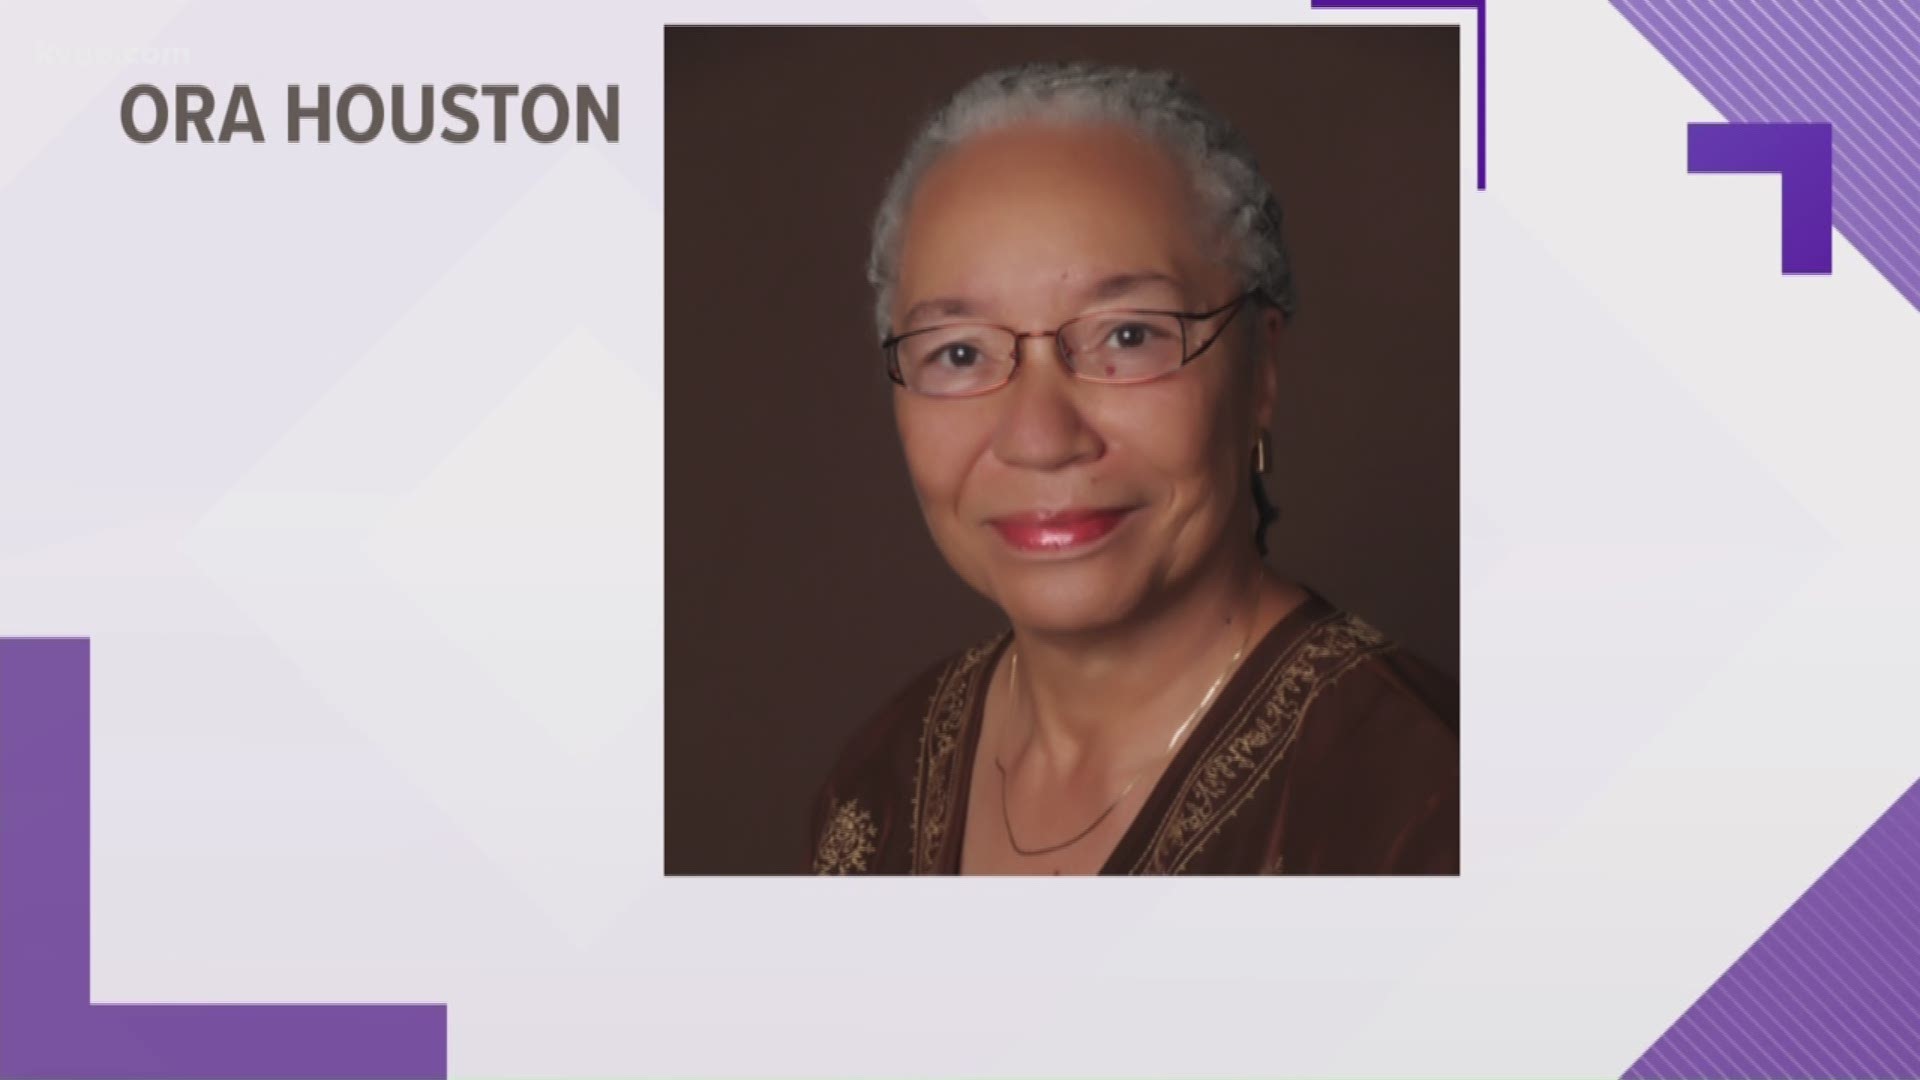 The Austin City Council Member for District 1, Ora Houston, announced Wednesday morning that she won't seek a second term.